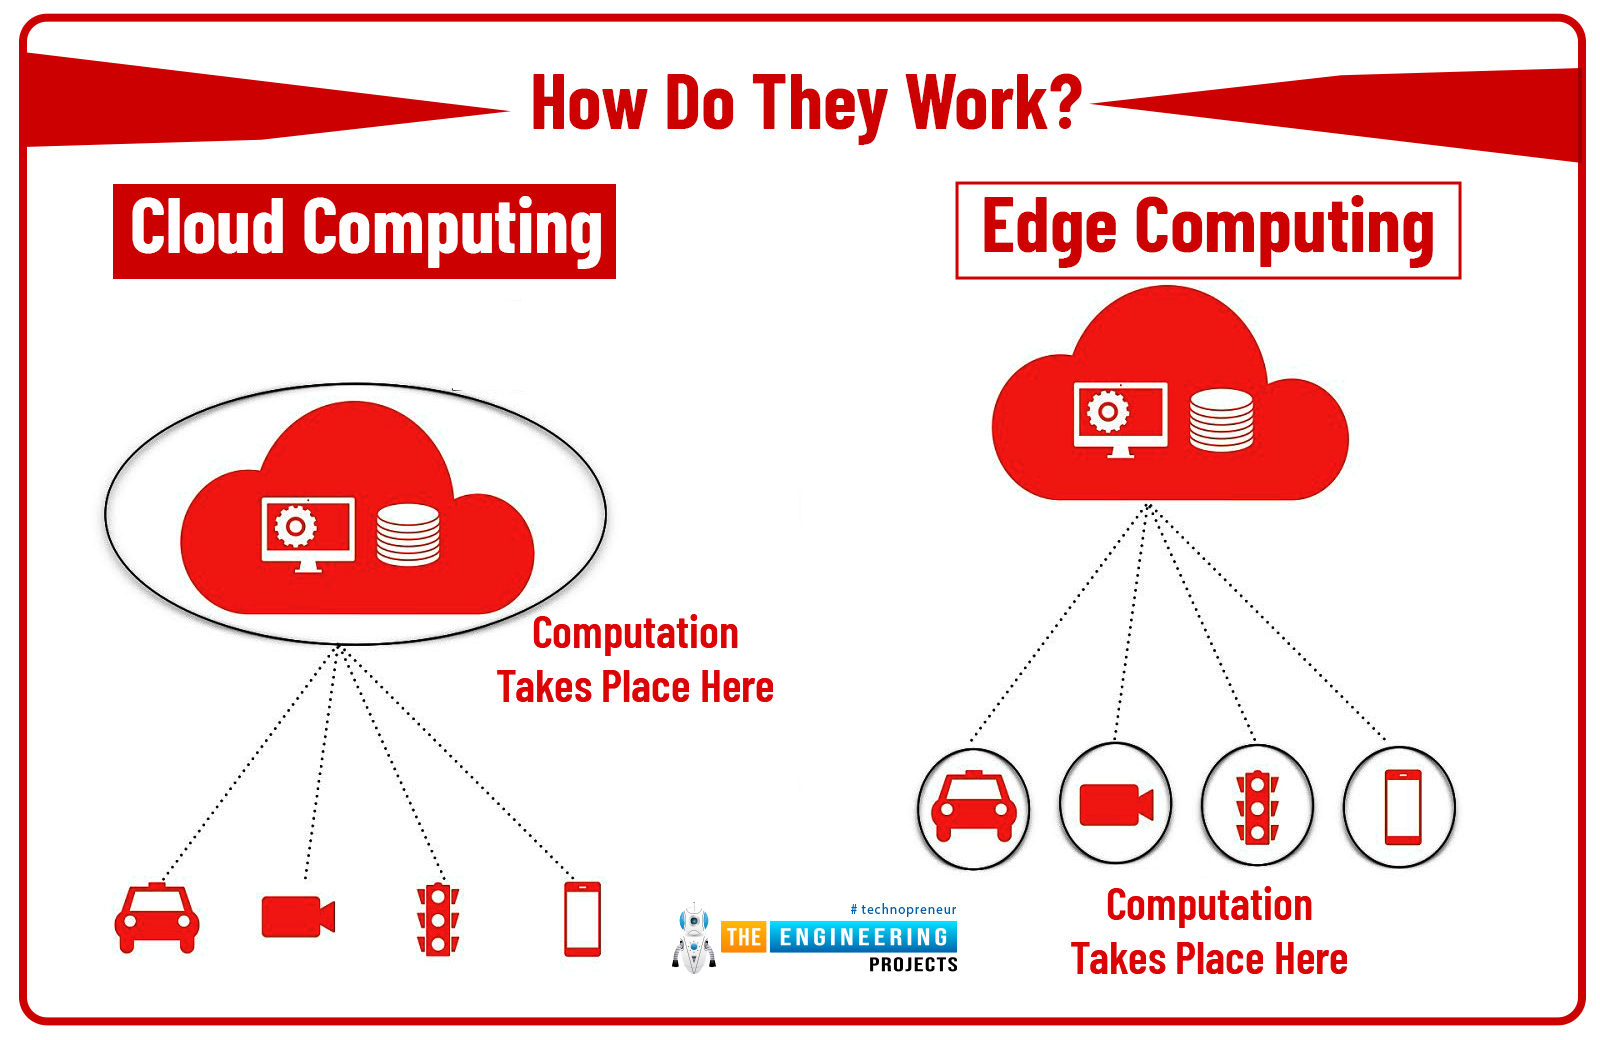 Edge Computing Vs Cloud Computing-Which is Better?